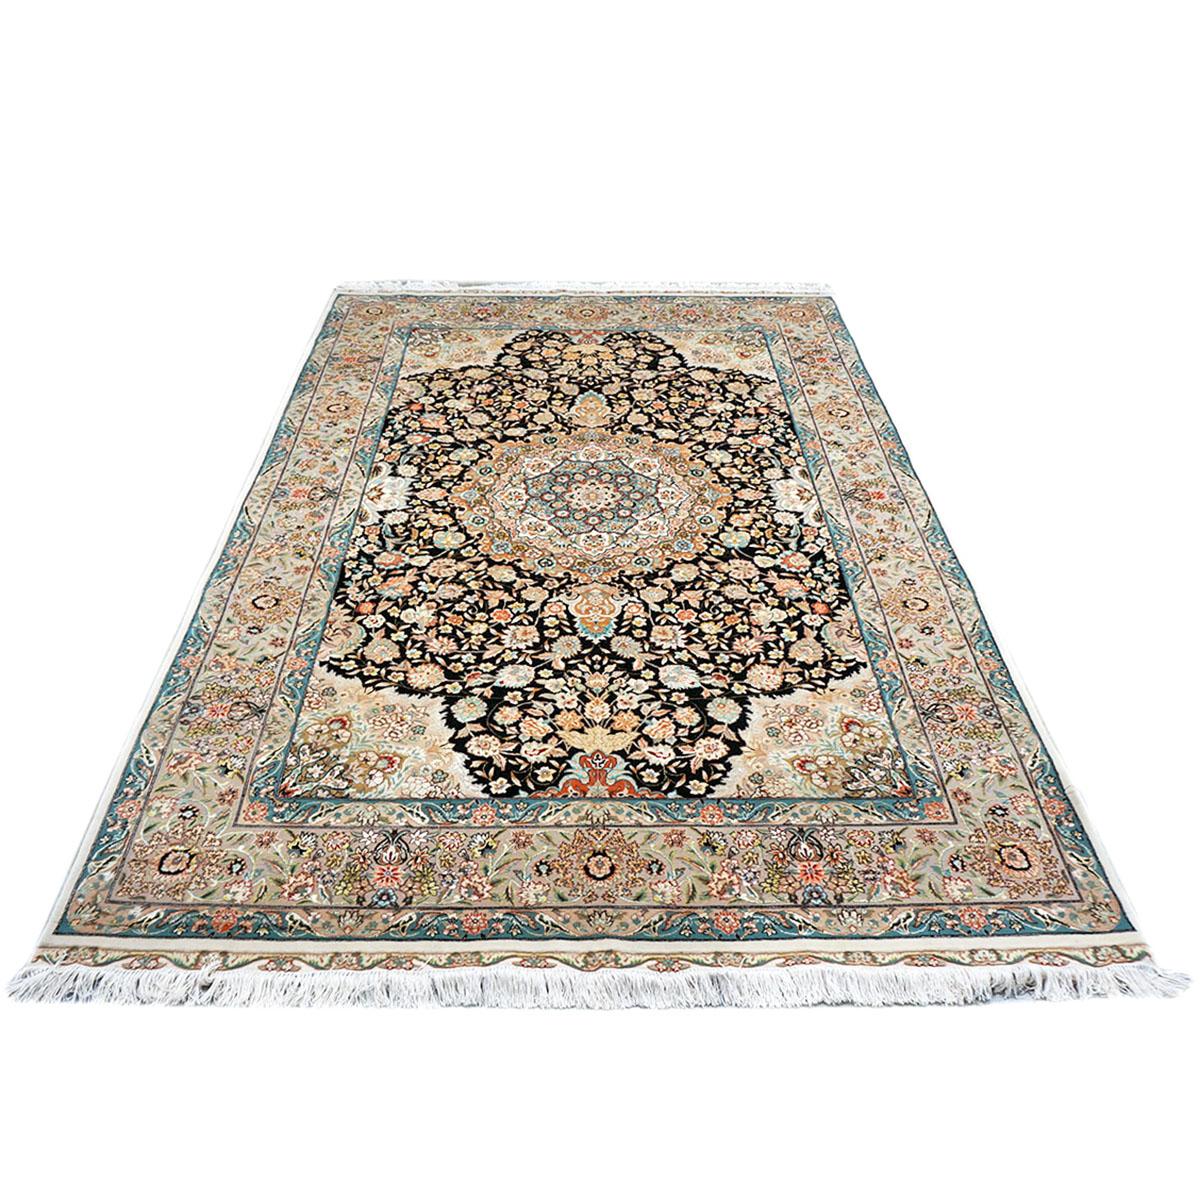 Hand-Woven Vintage Persian Tabriz Wool & Silk 5x8 Blue, Black, & Ivory Area Rug For Sale